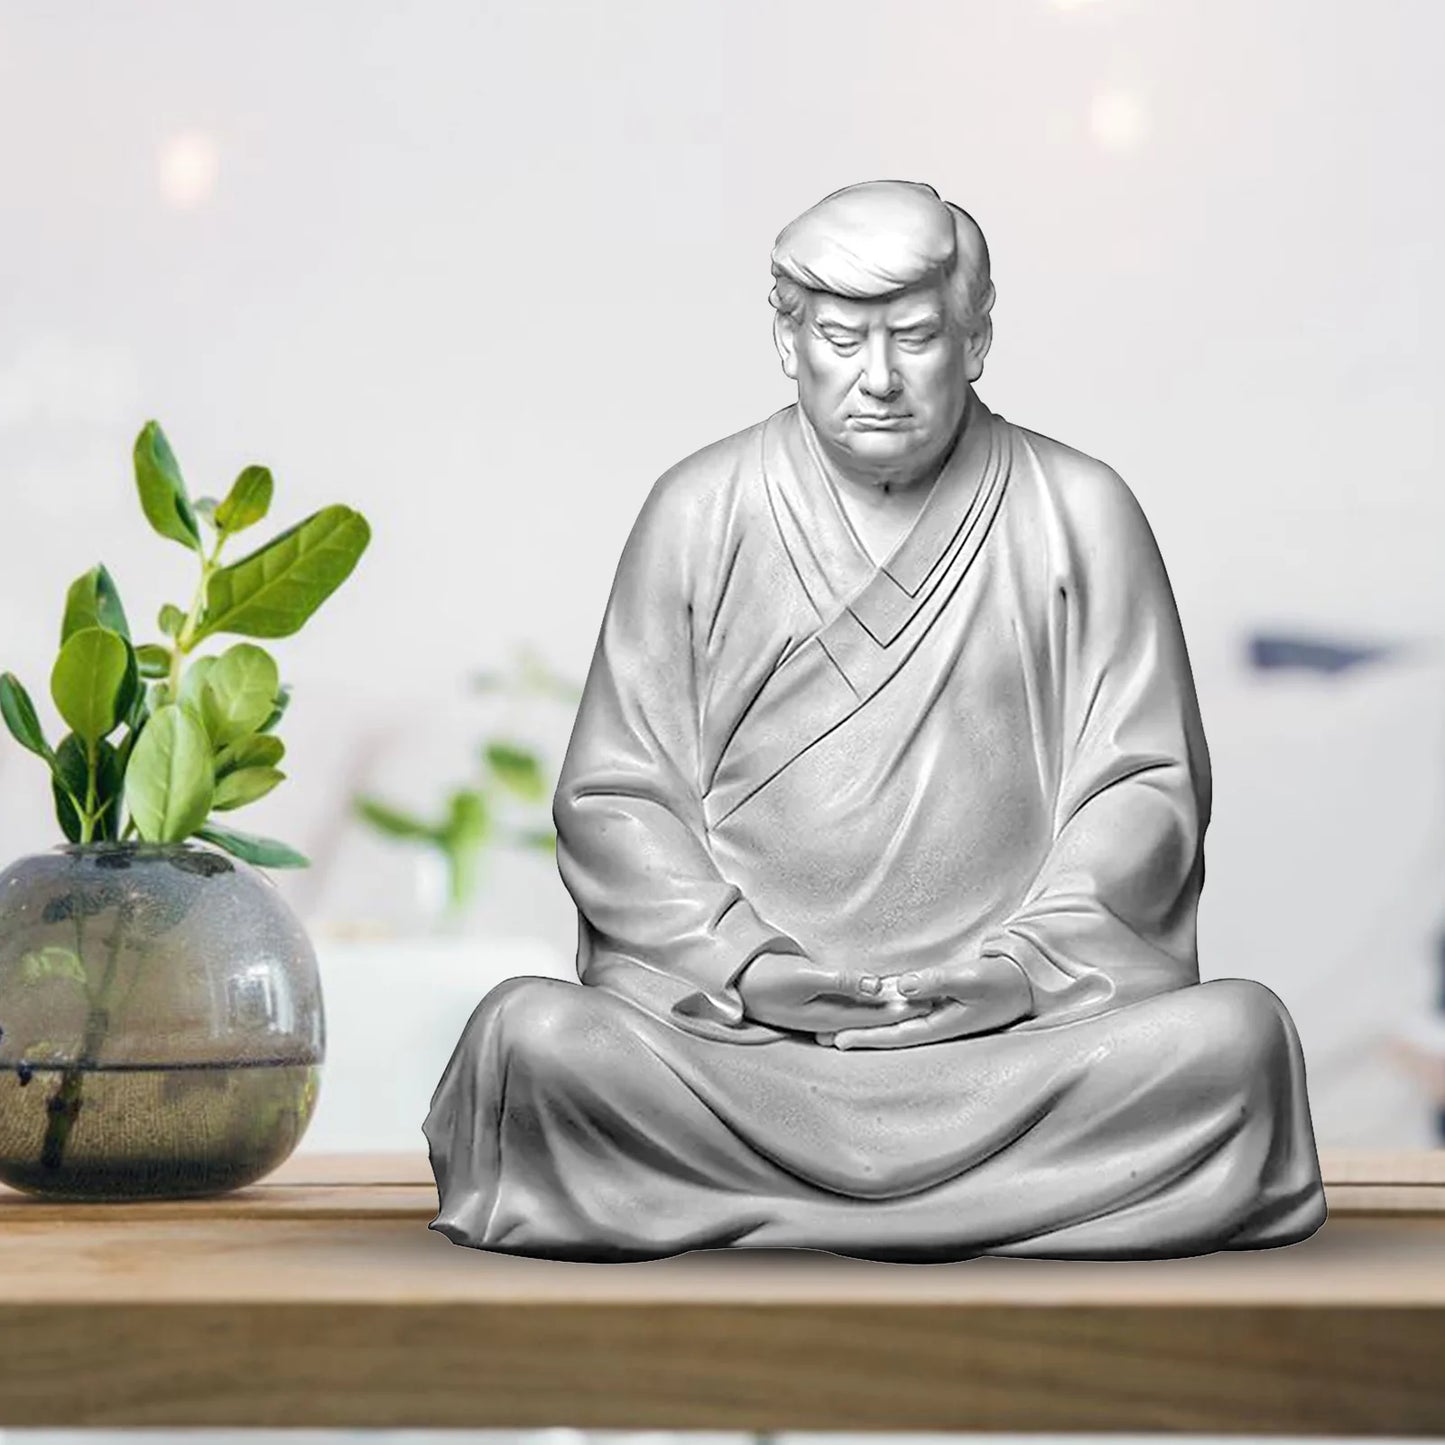 Donald Trump Buddha Figurine Statue Table Decoration Crafts Resin Mediating Buddha Sculptures Home Office Ornaments Gift